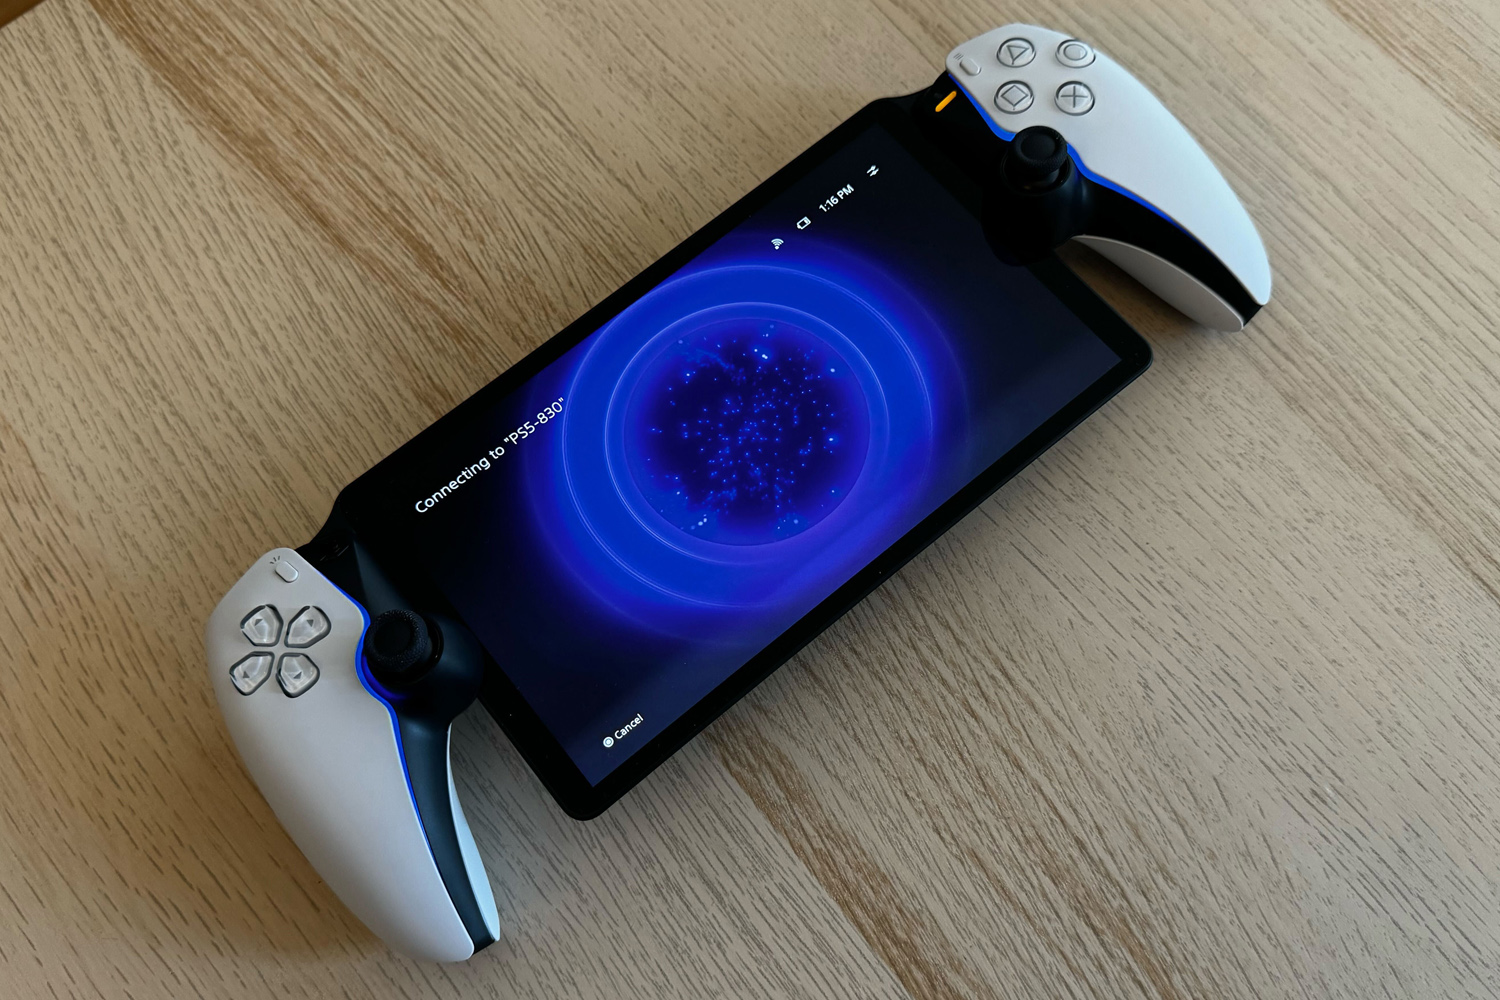 Review: Sony's PlayStation Portal does one narrow thing, but does